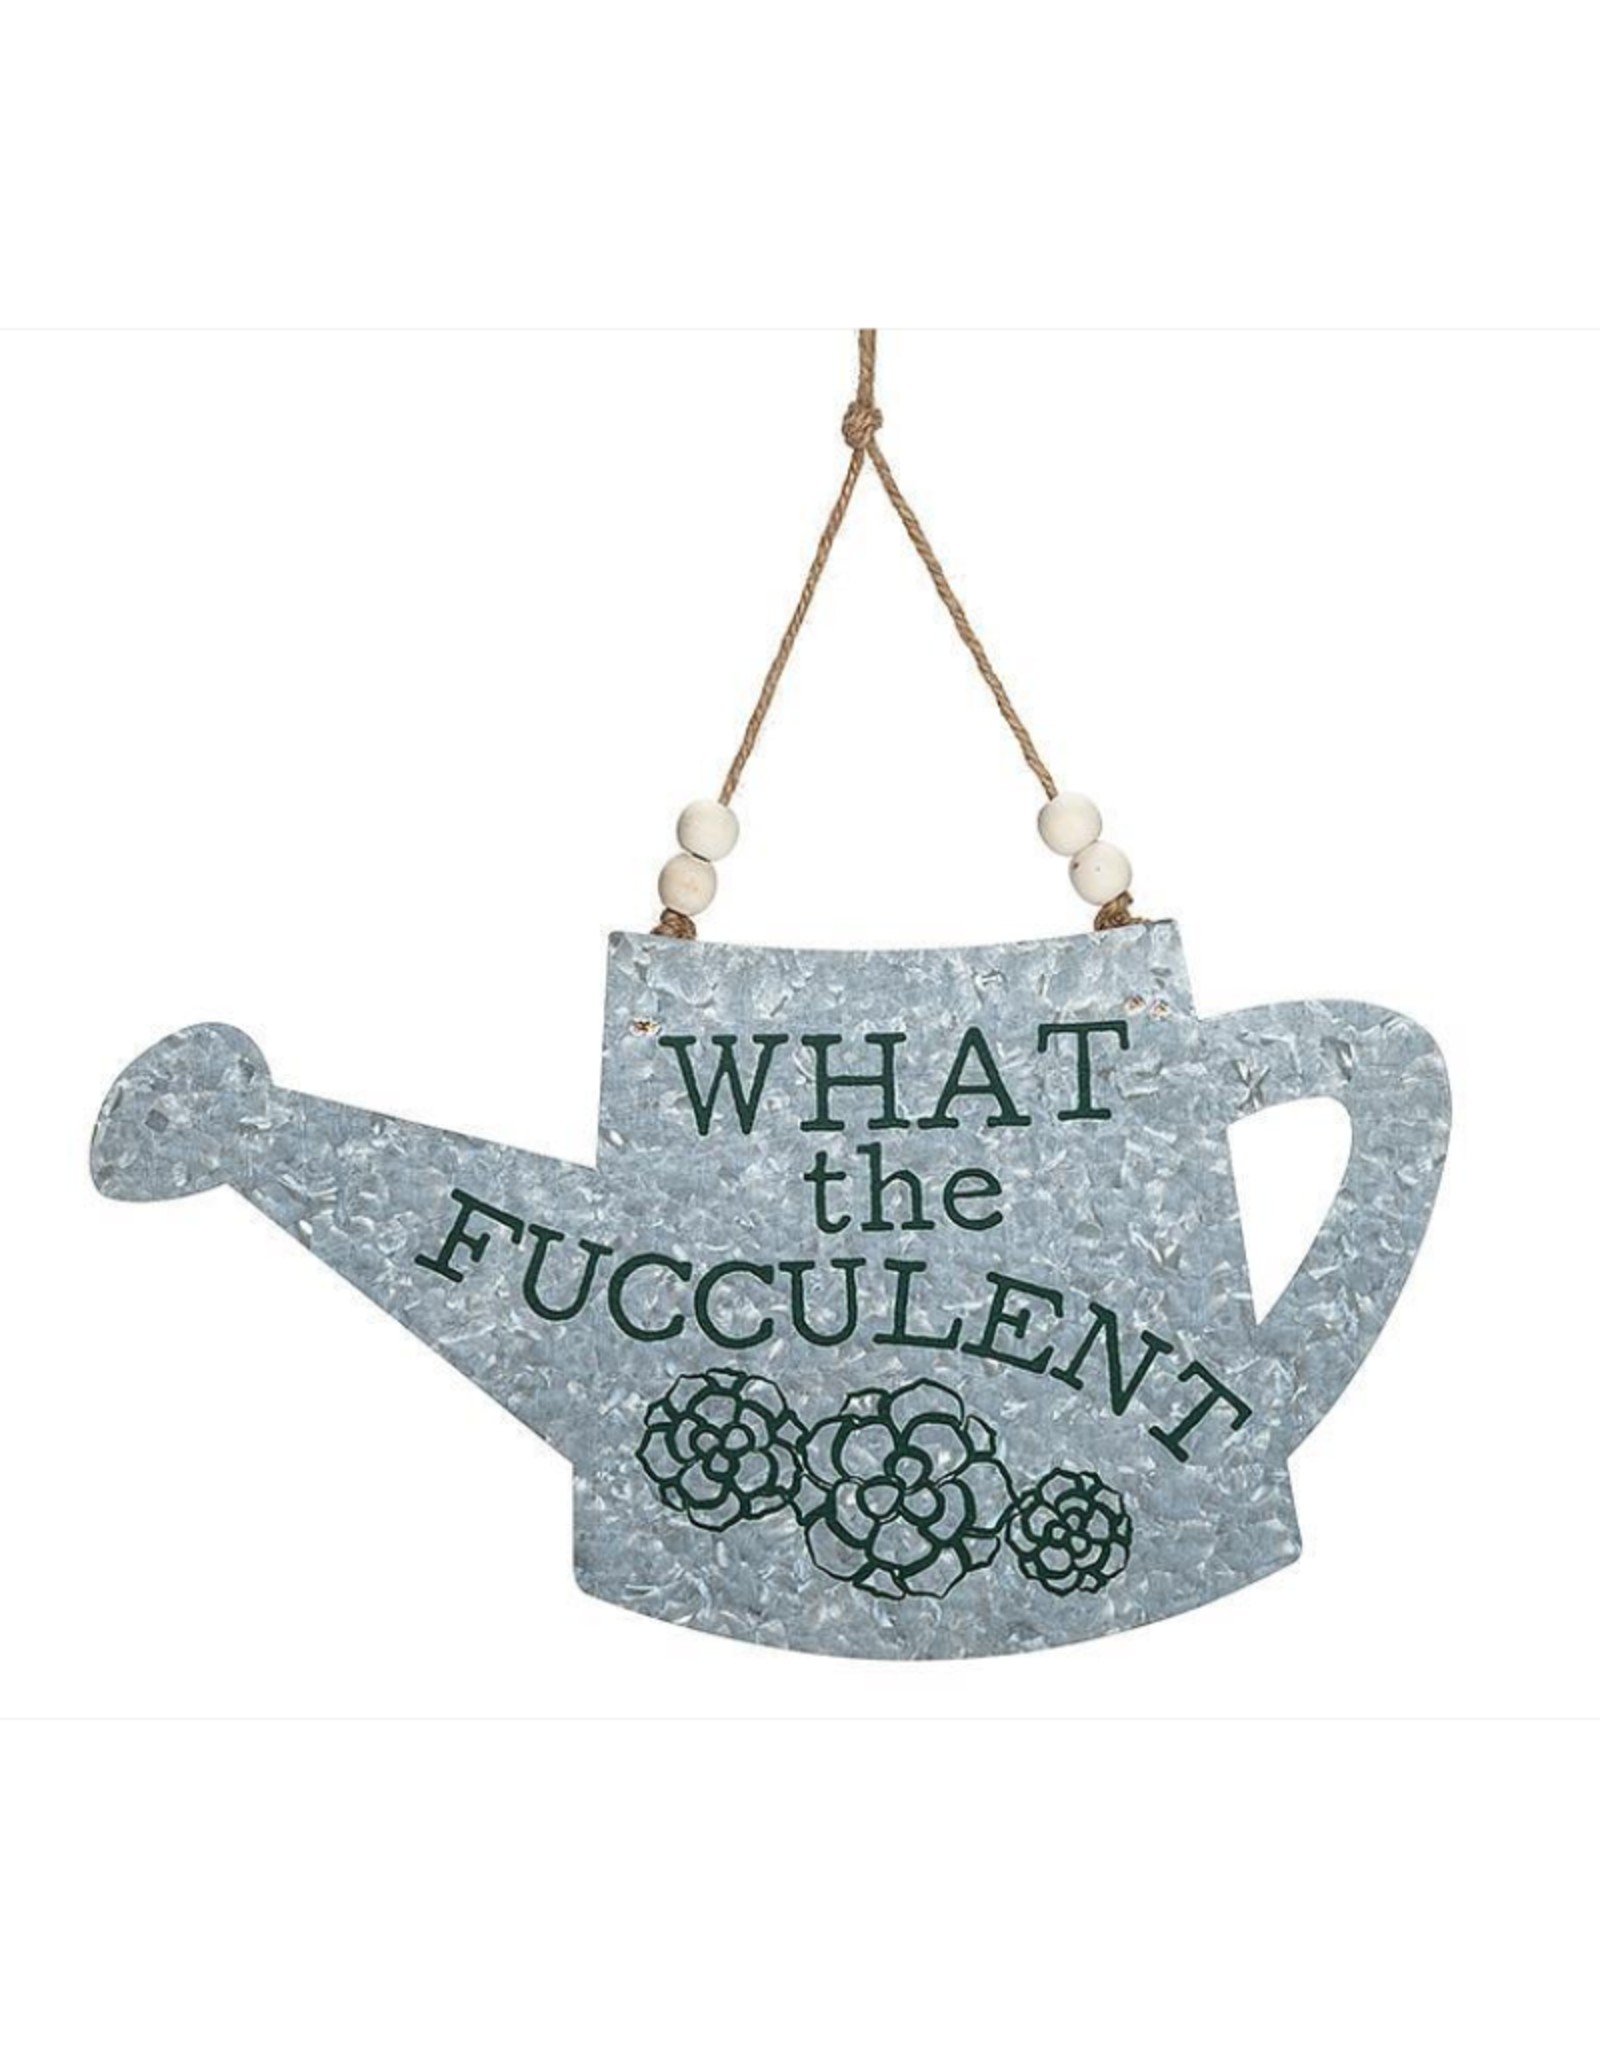 Sign Abbott Watering Can “What the Fucculent”